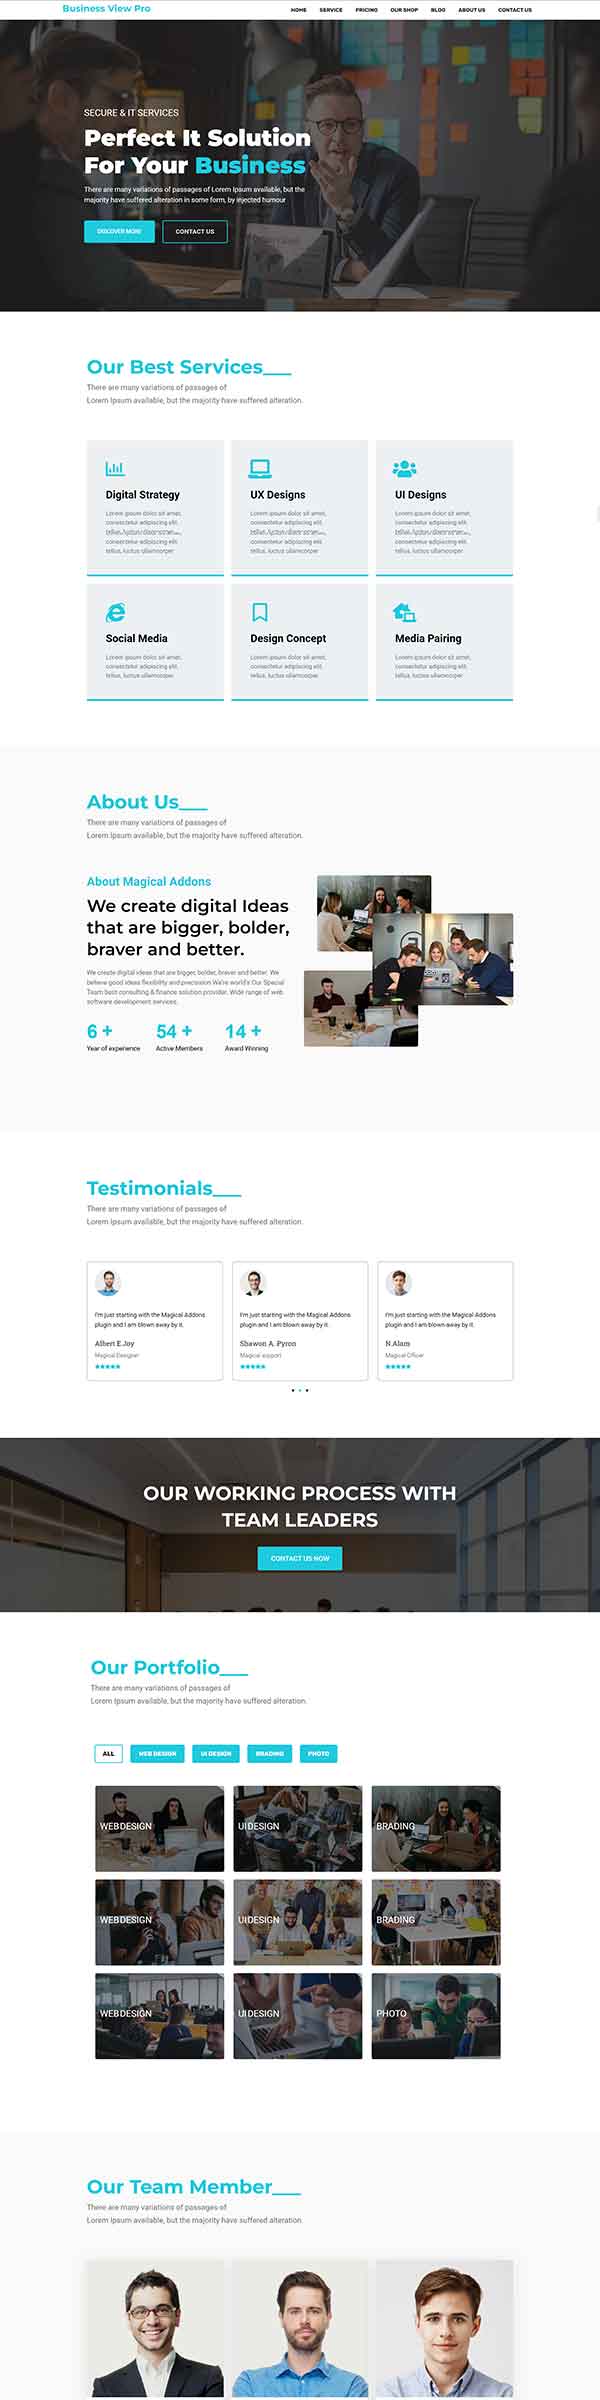 Business View Pro Home Page demo